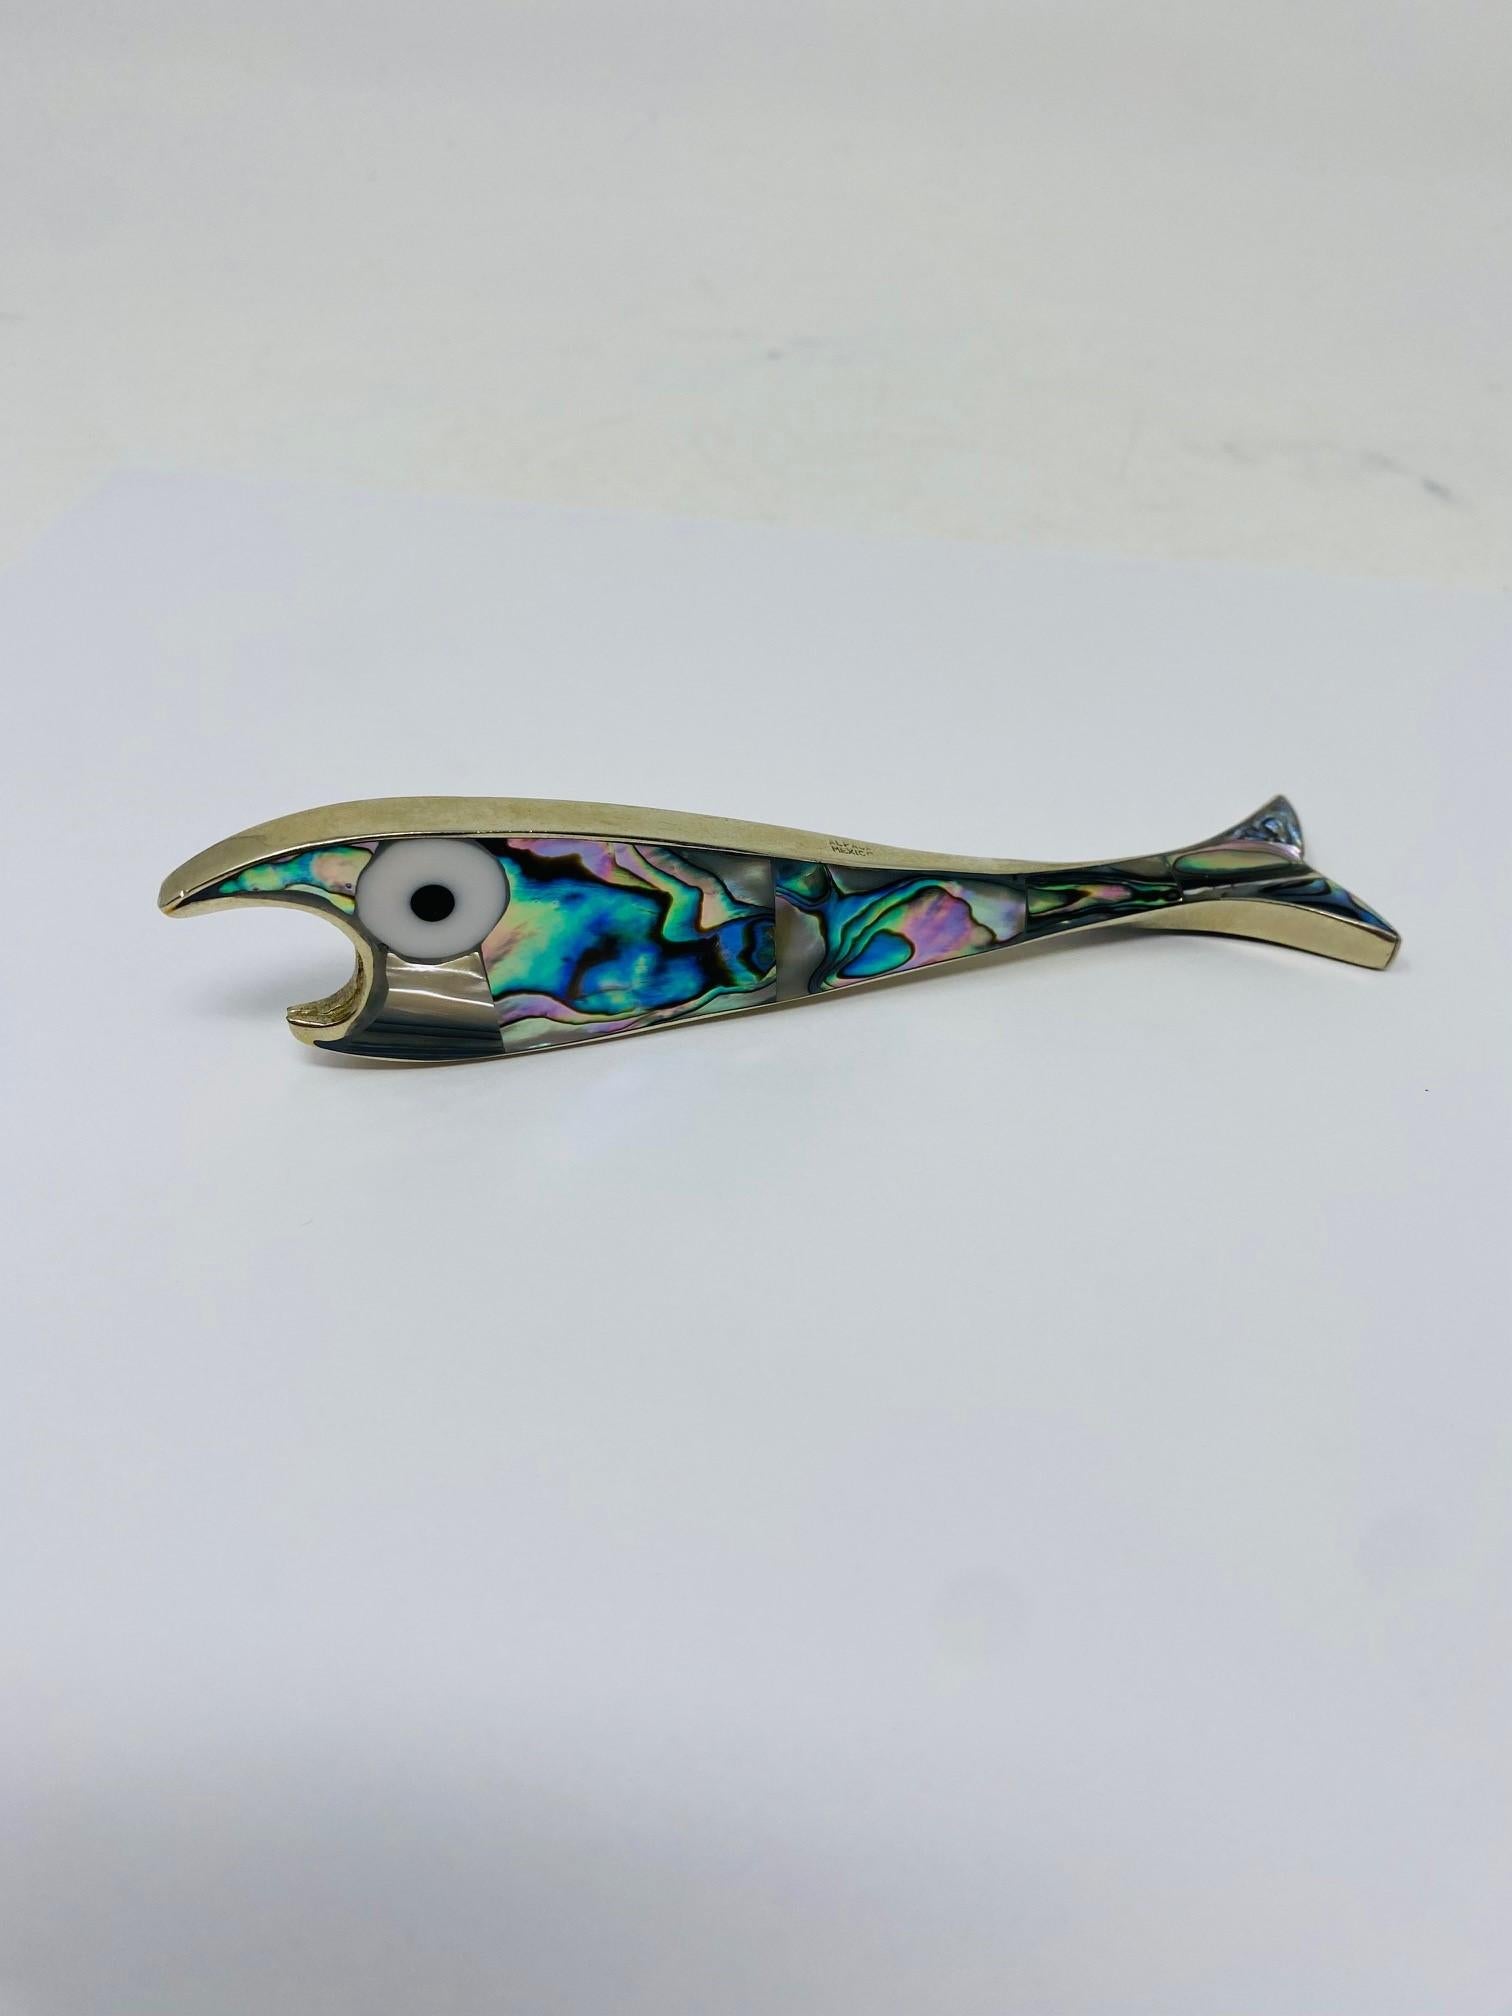 Mexican Alpaca Silver and Abalone Bottle Opener.  A beautiful statement piece at the bar, especially one with Mid-century influences. The Abalone and silver are extraordinary and a great addition to your bar and décor. Details that interpret your